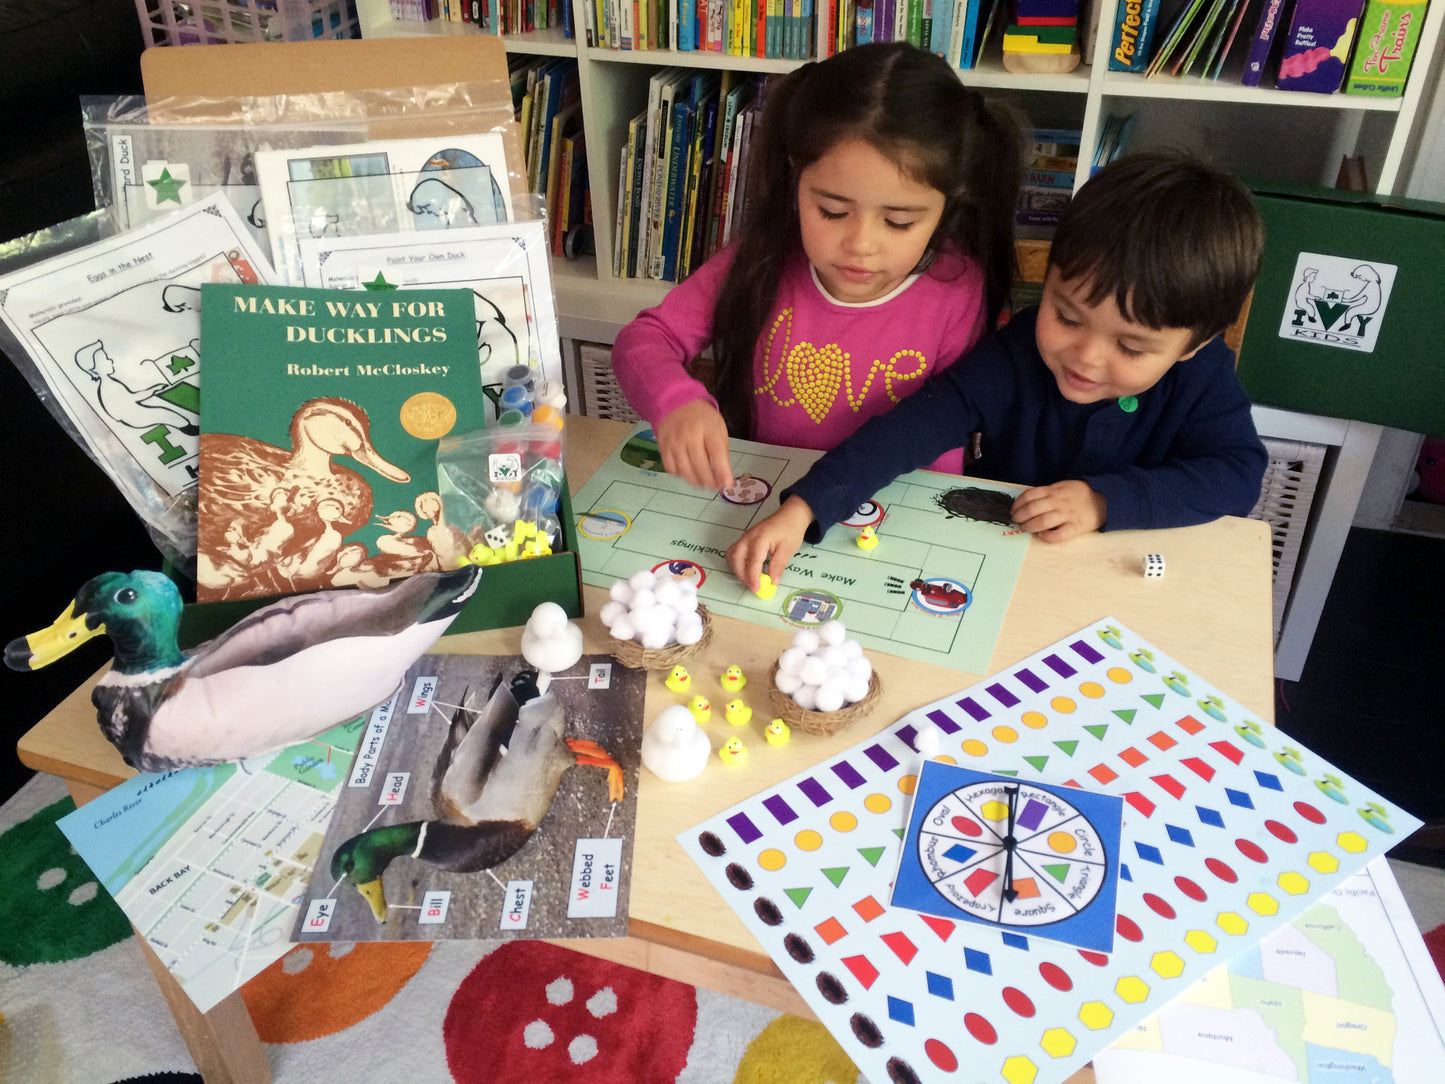 Children's subscription box with a book and over 10 STEAM activities inspired by the story